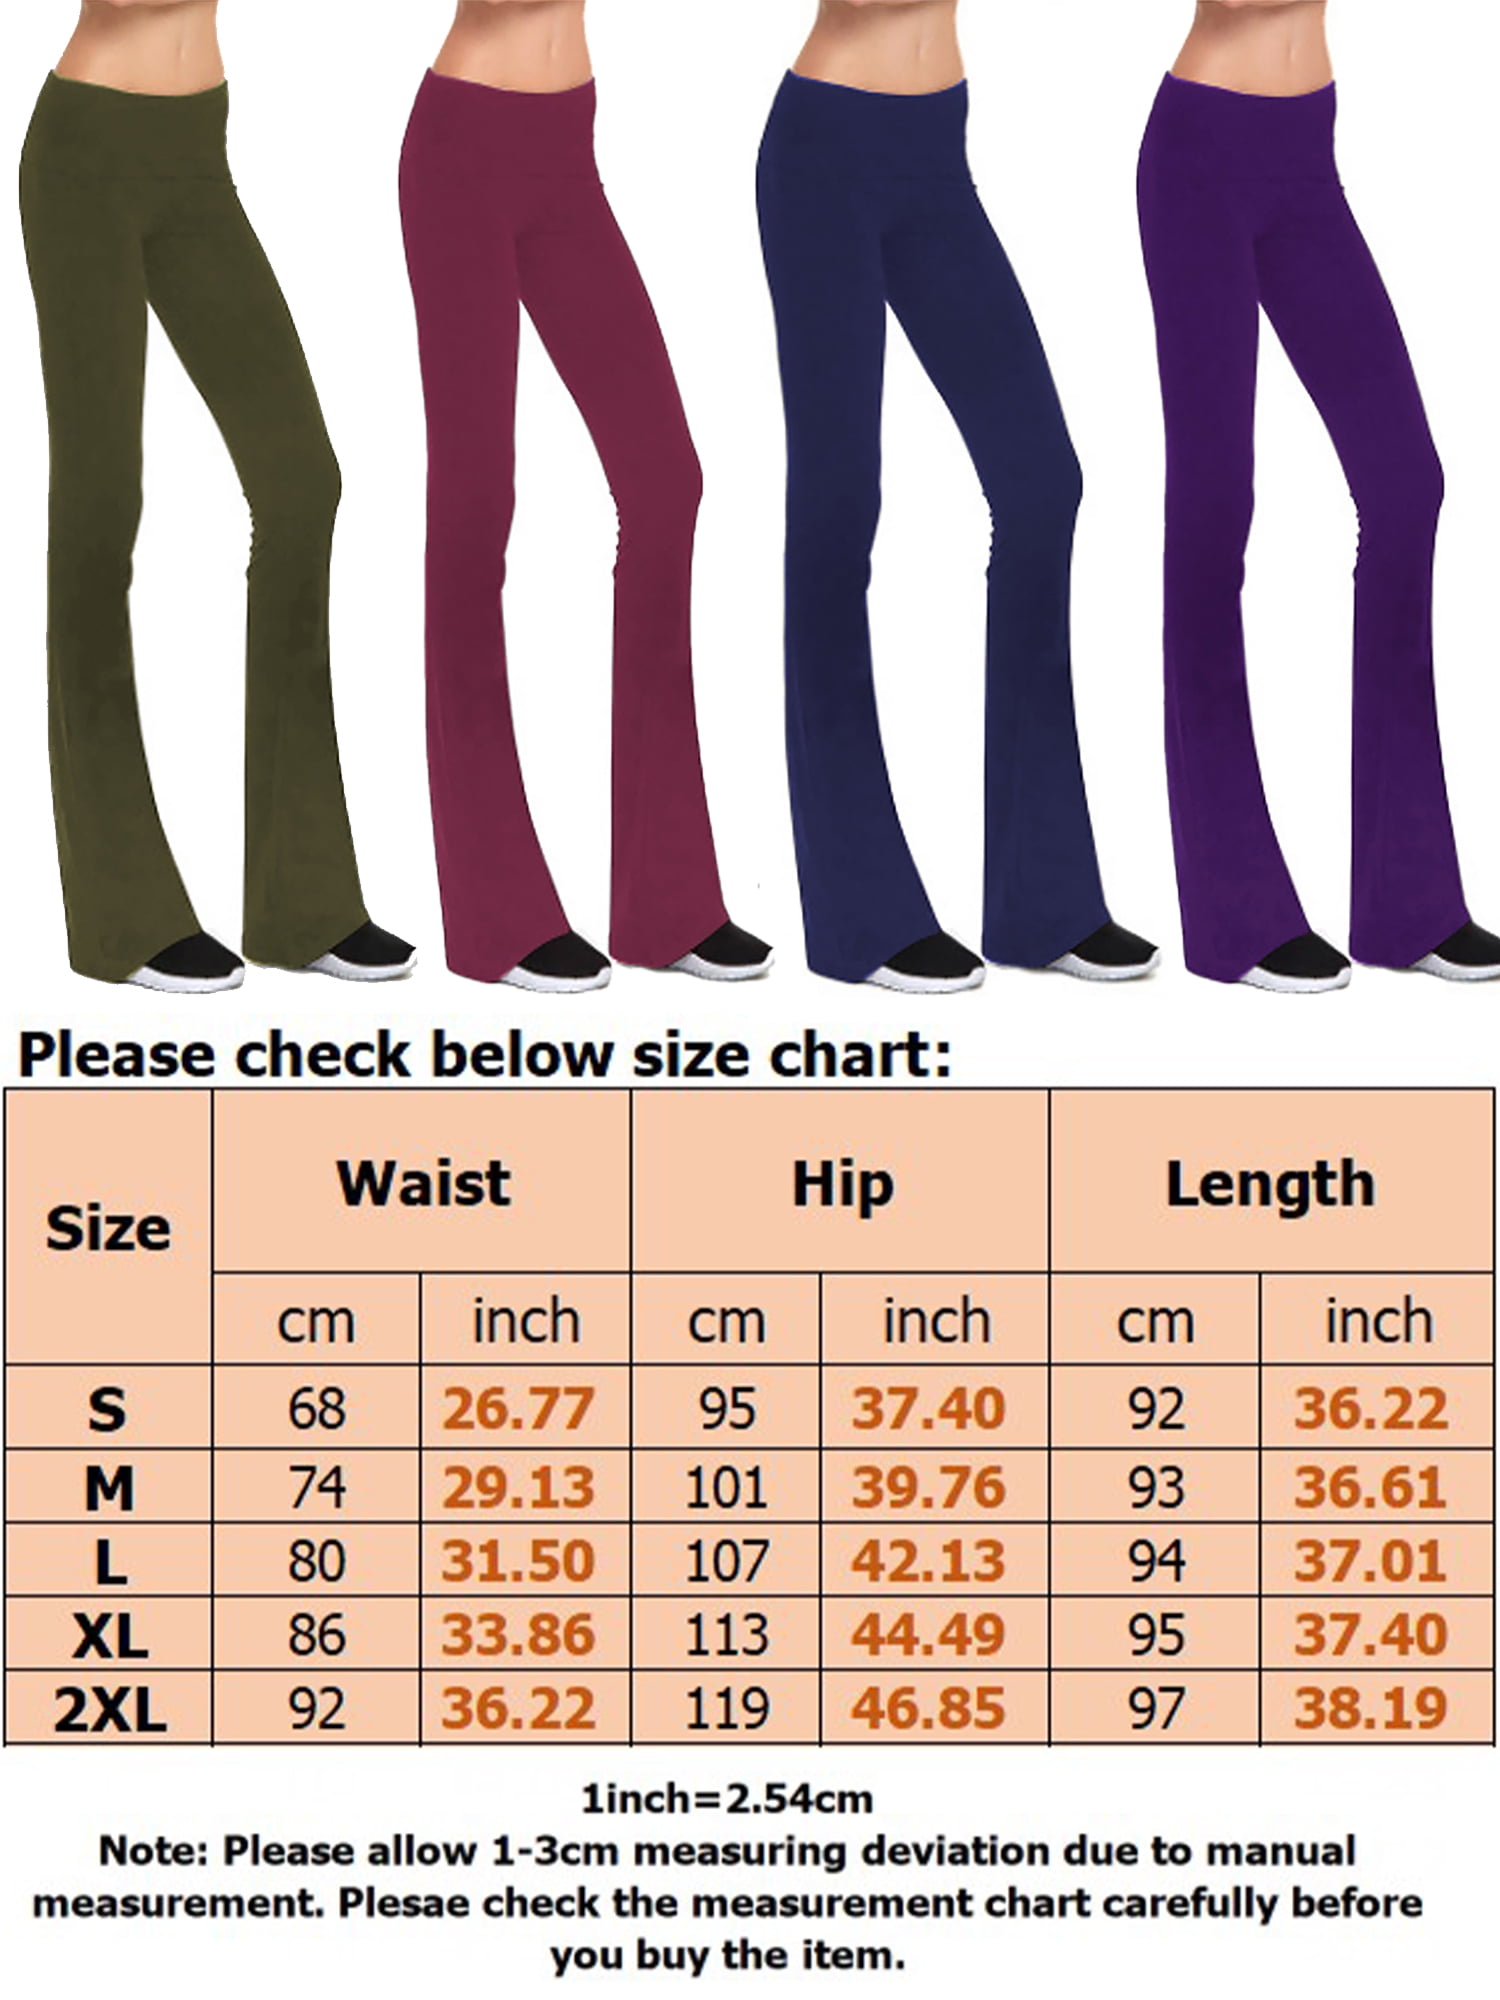 Women Fold-Over Waistband Stretchy Cotton Blend Yoga Pants with A Wide  Flare Leg Trouser Pants High Waist Stretch Flare Wide Leg Yoga Pants Slim  Boho